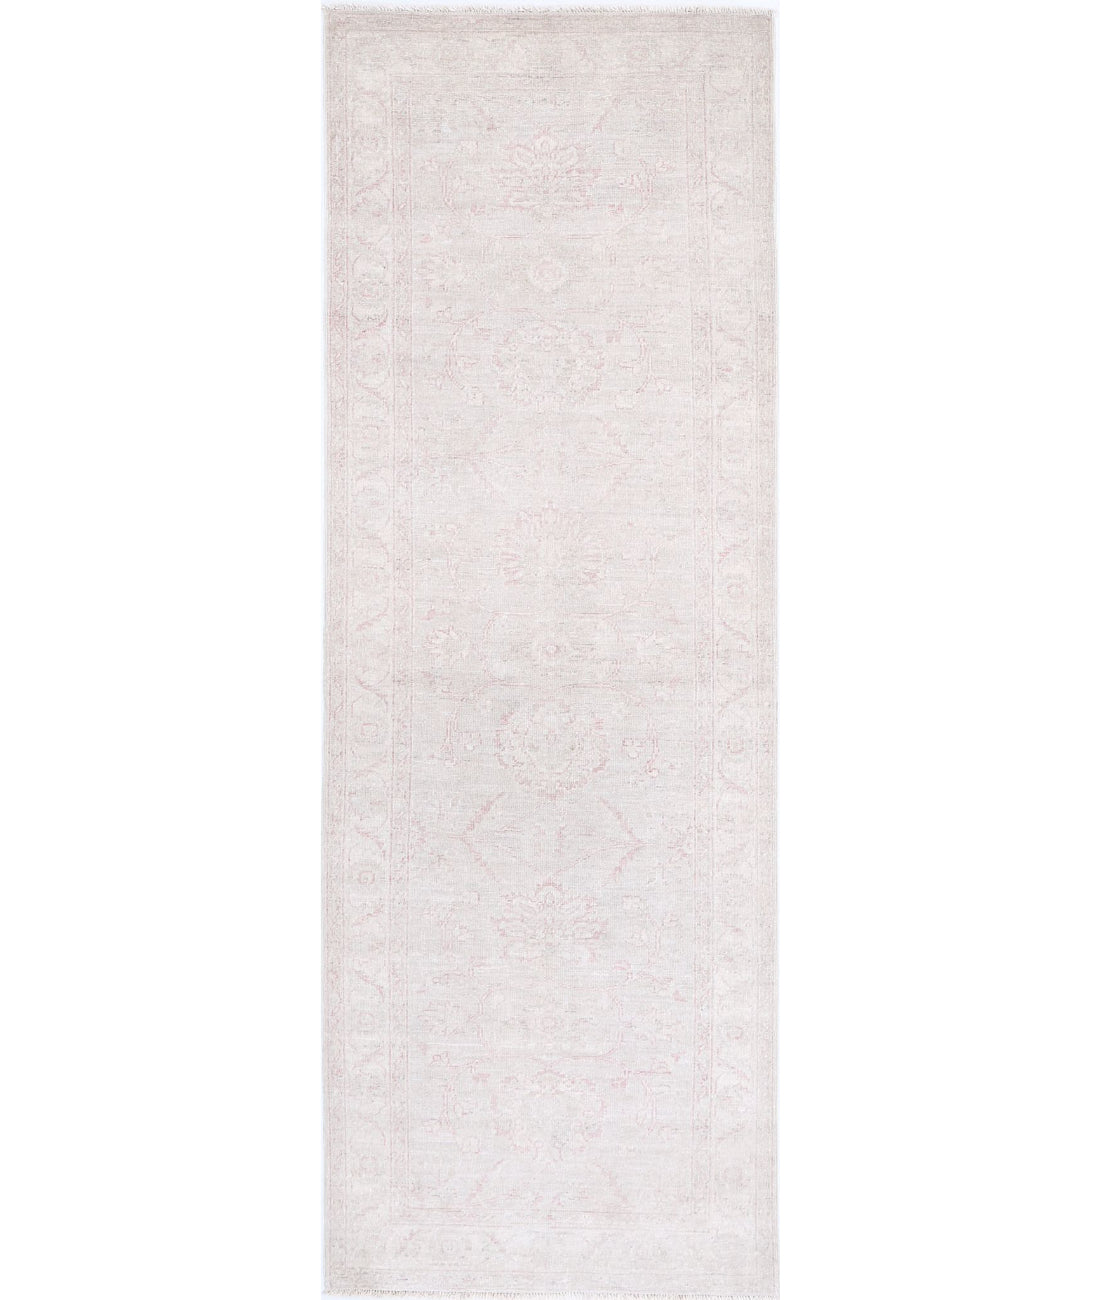 Hand Knotted Serenity Wool Rug - 2'8'' x 8'3'' 2'8'' x 8'3'' (80 X 248) / Grey / Ivory